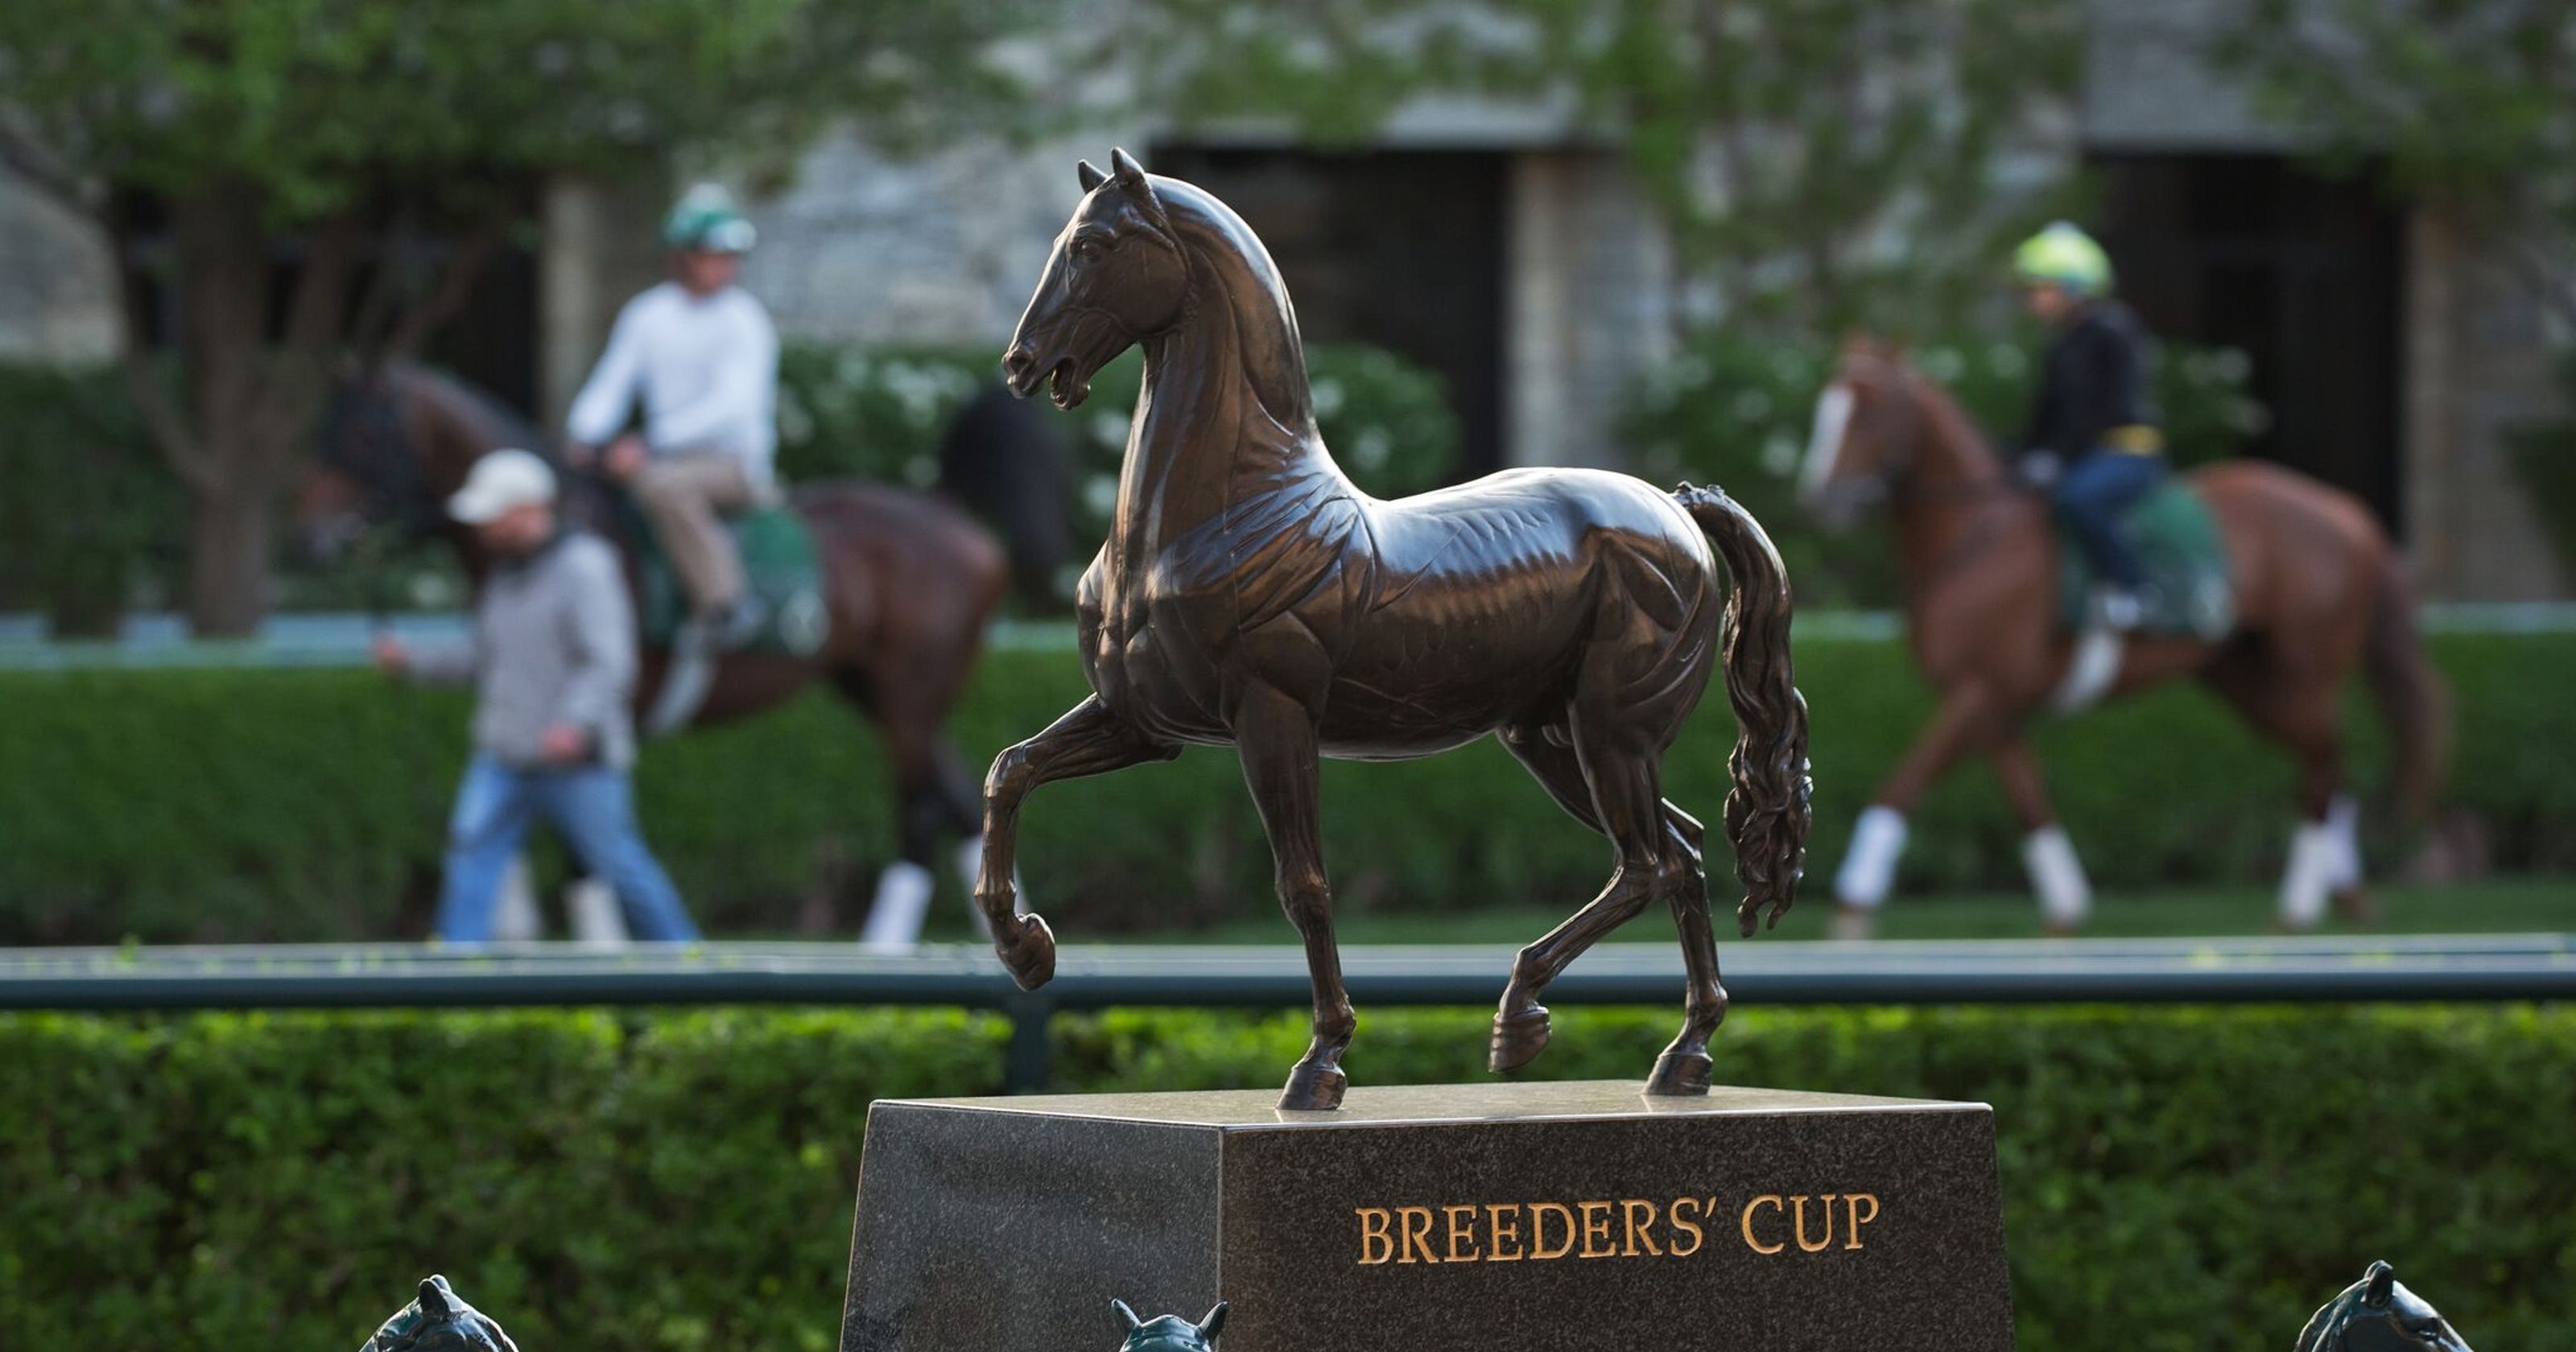 Breeders' Cup 2018 guide parking, tickets, post times, draw